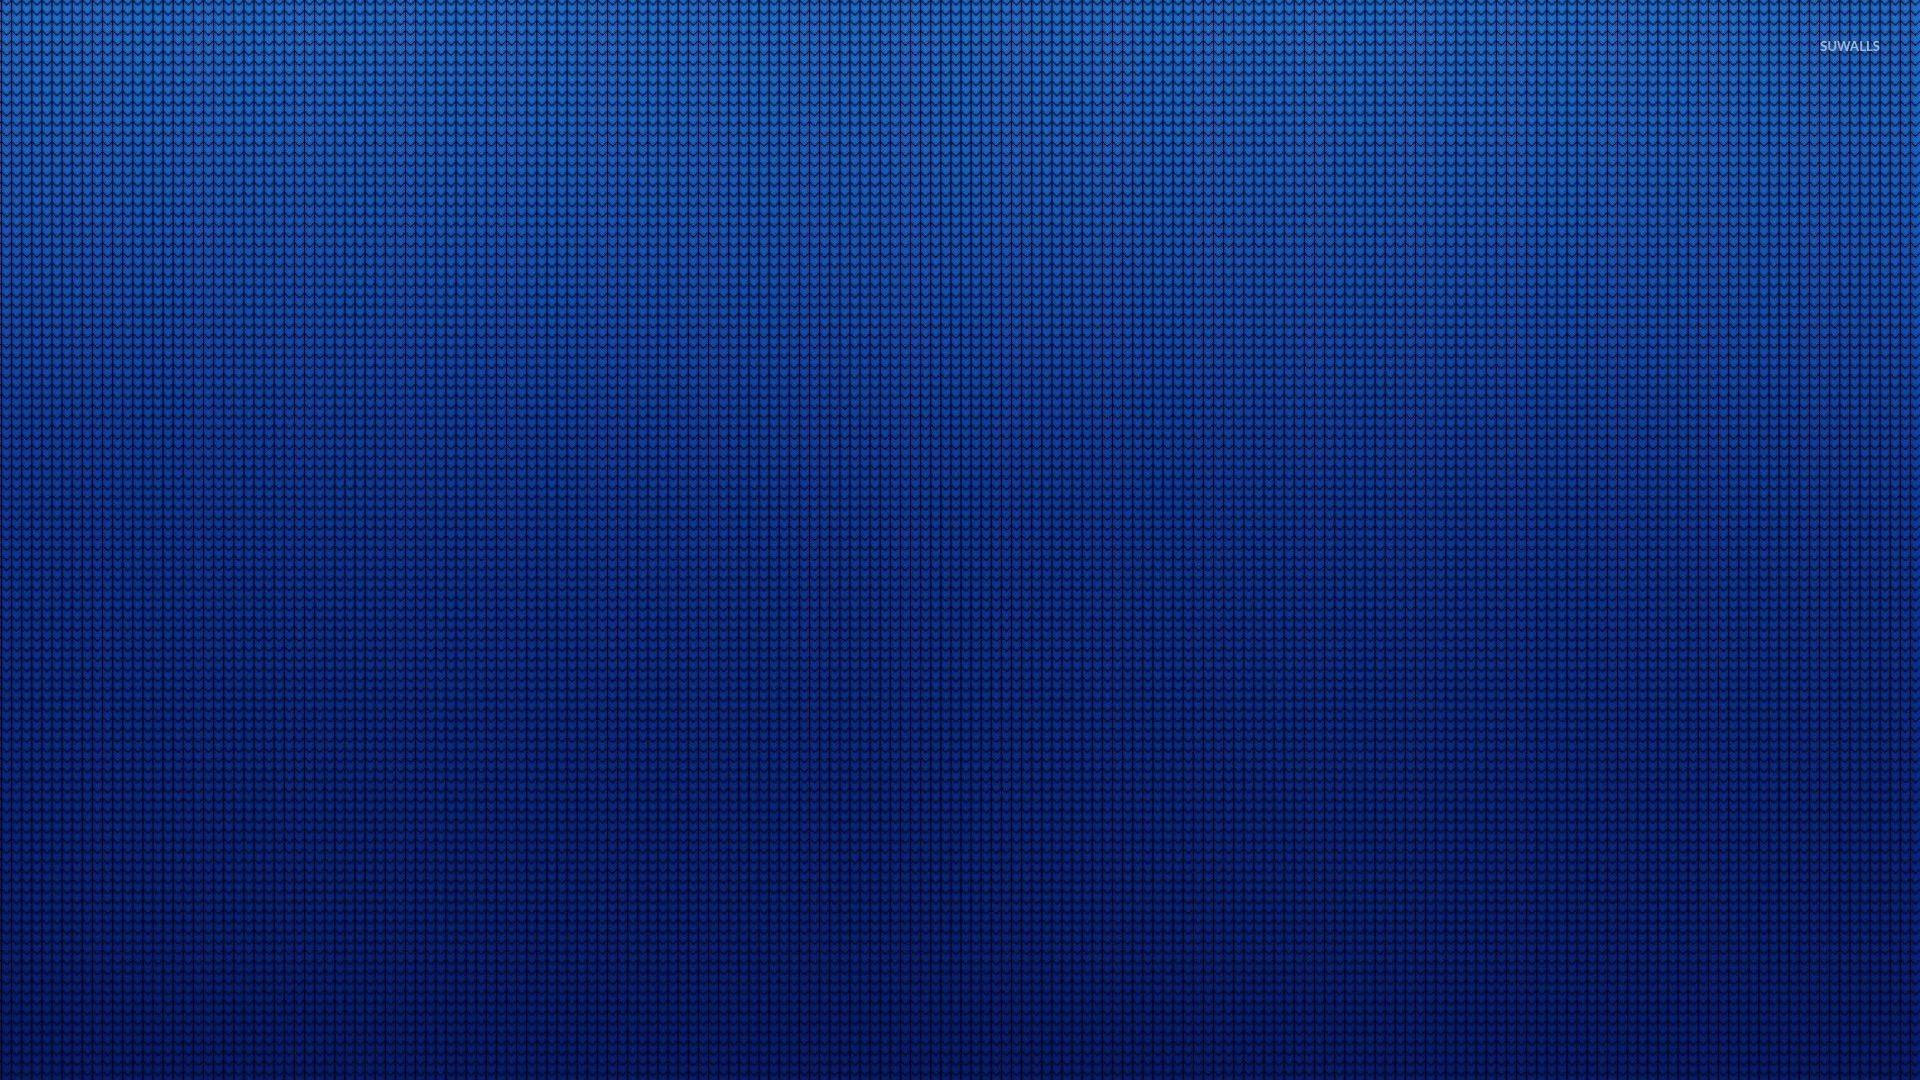 Free download 40 Blue and Metallic Wallpapers Download at WallpaperBro  [1920x1080] for your Desktop, Mobile & Tablet | Explore 25+ Metallic Blue  Wallpapers | Metallic Blue Wallpaper, Metallic Wallpaper, Metallic Wallpaper  Canada